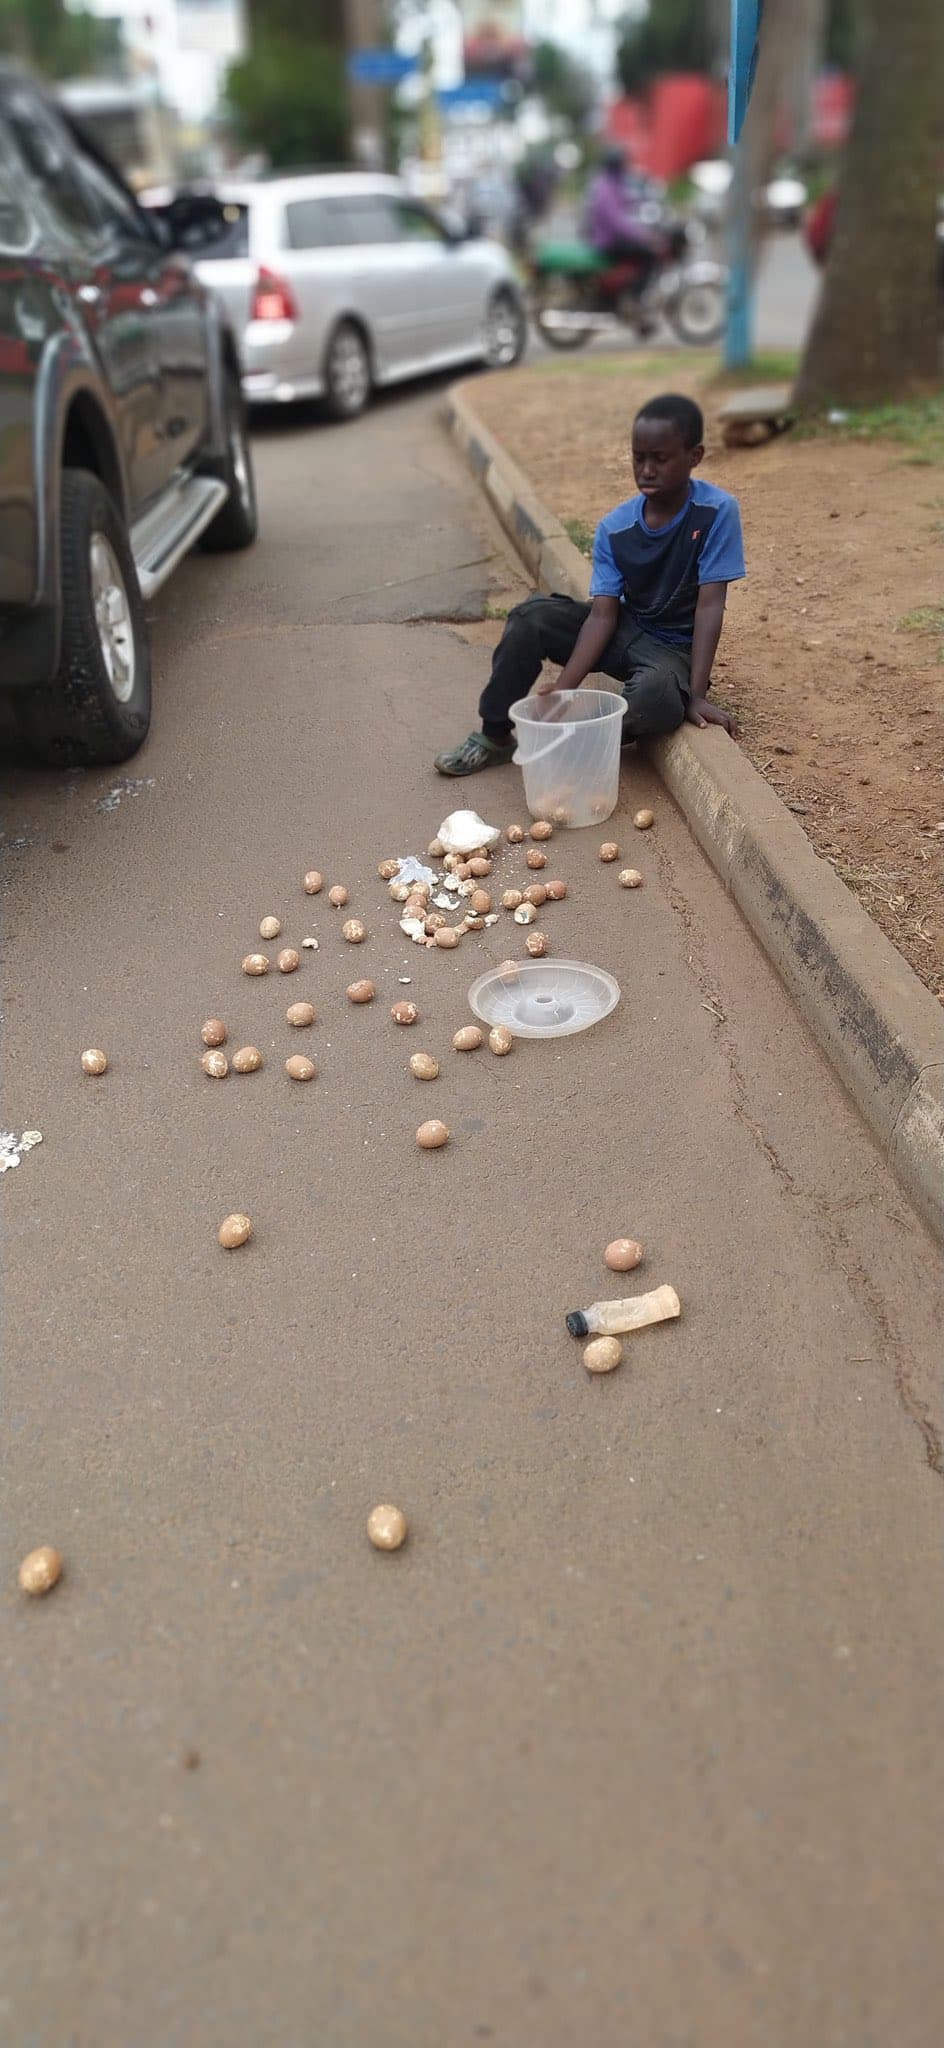 Street kid using broken eggs to take advantage of people's goodness in Accra exposed.